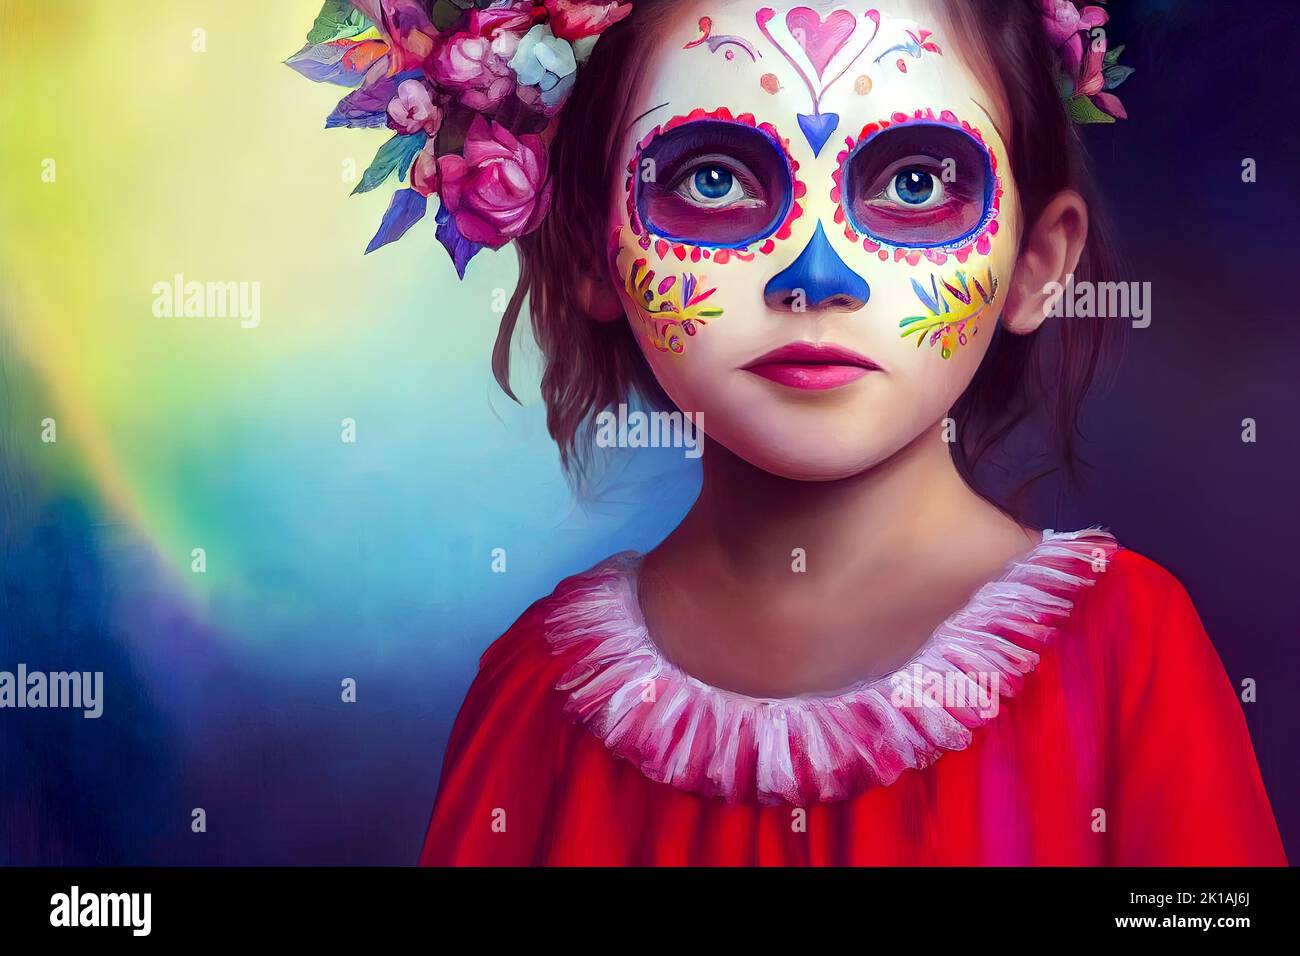 Sugar skull face paint hi-res stock and images - Alamy